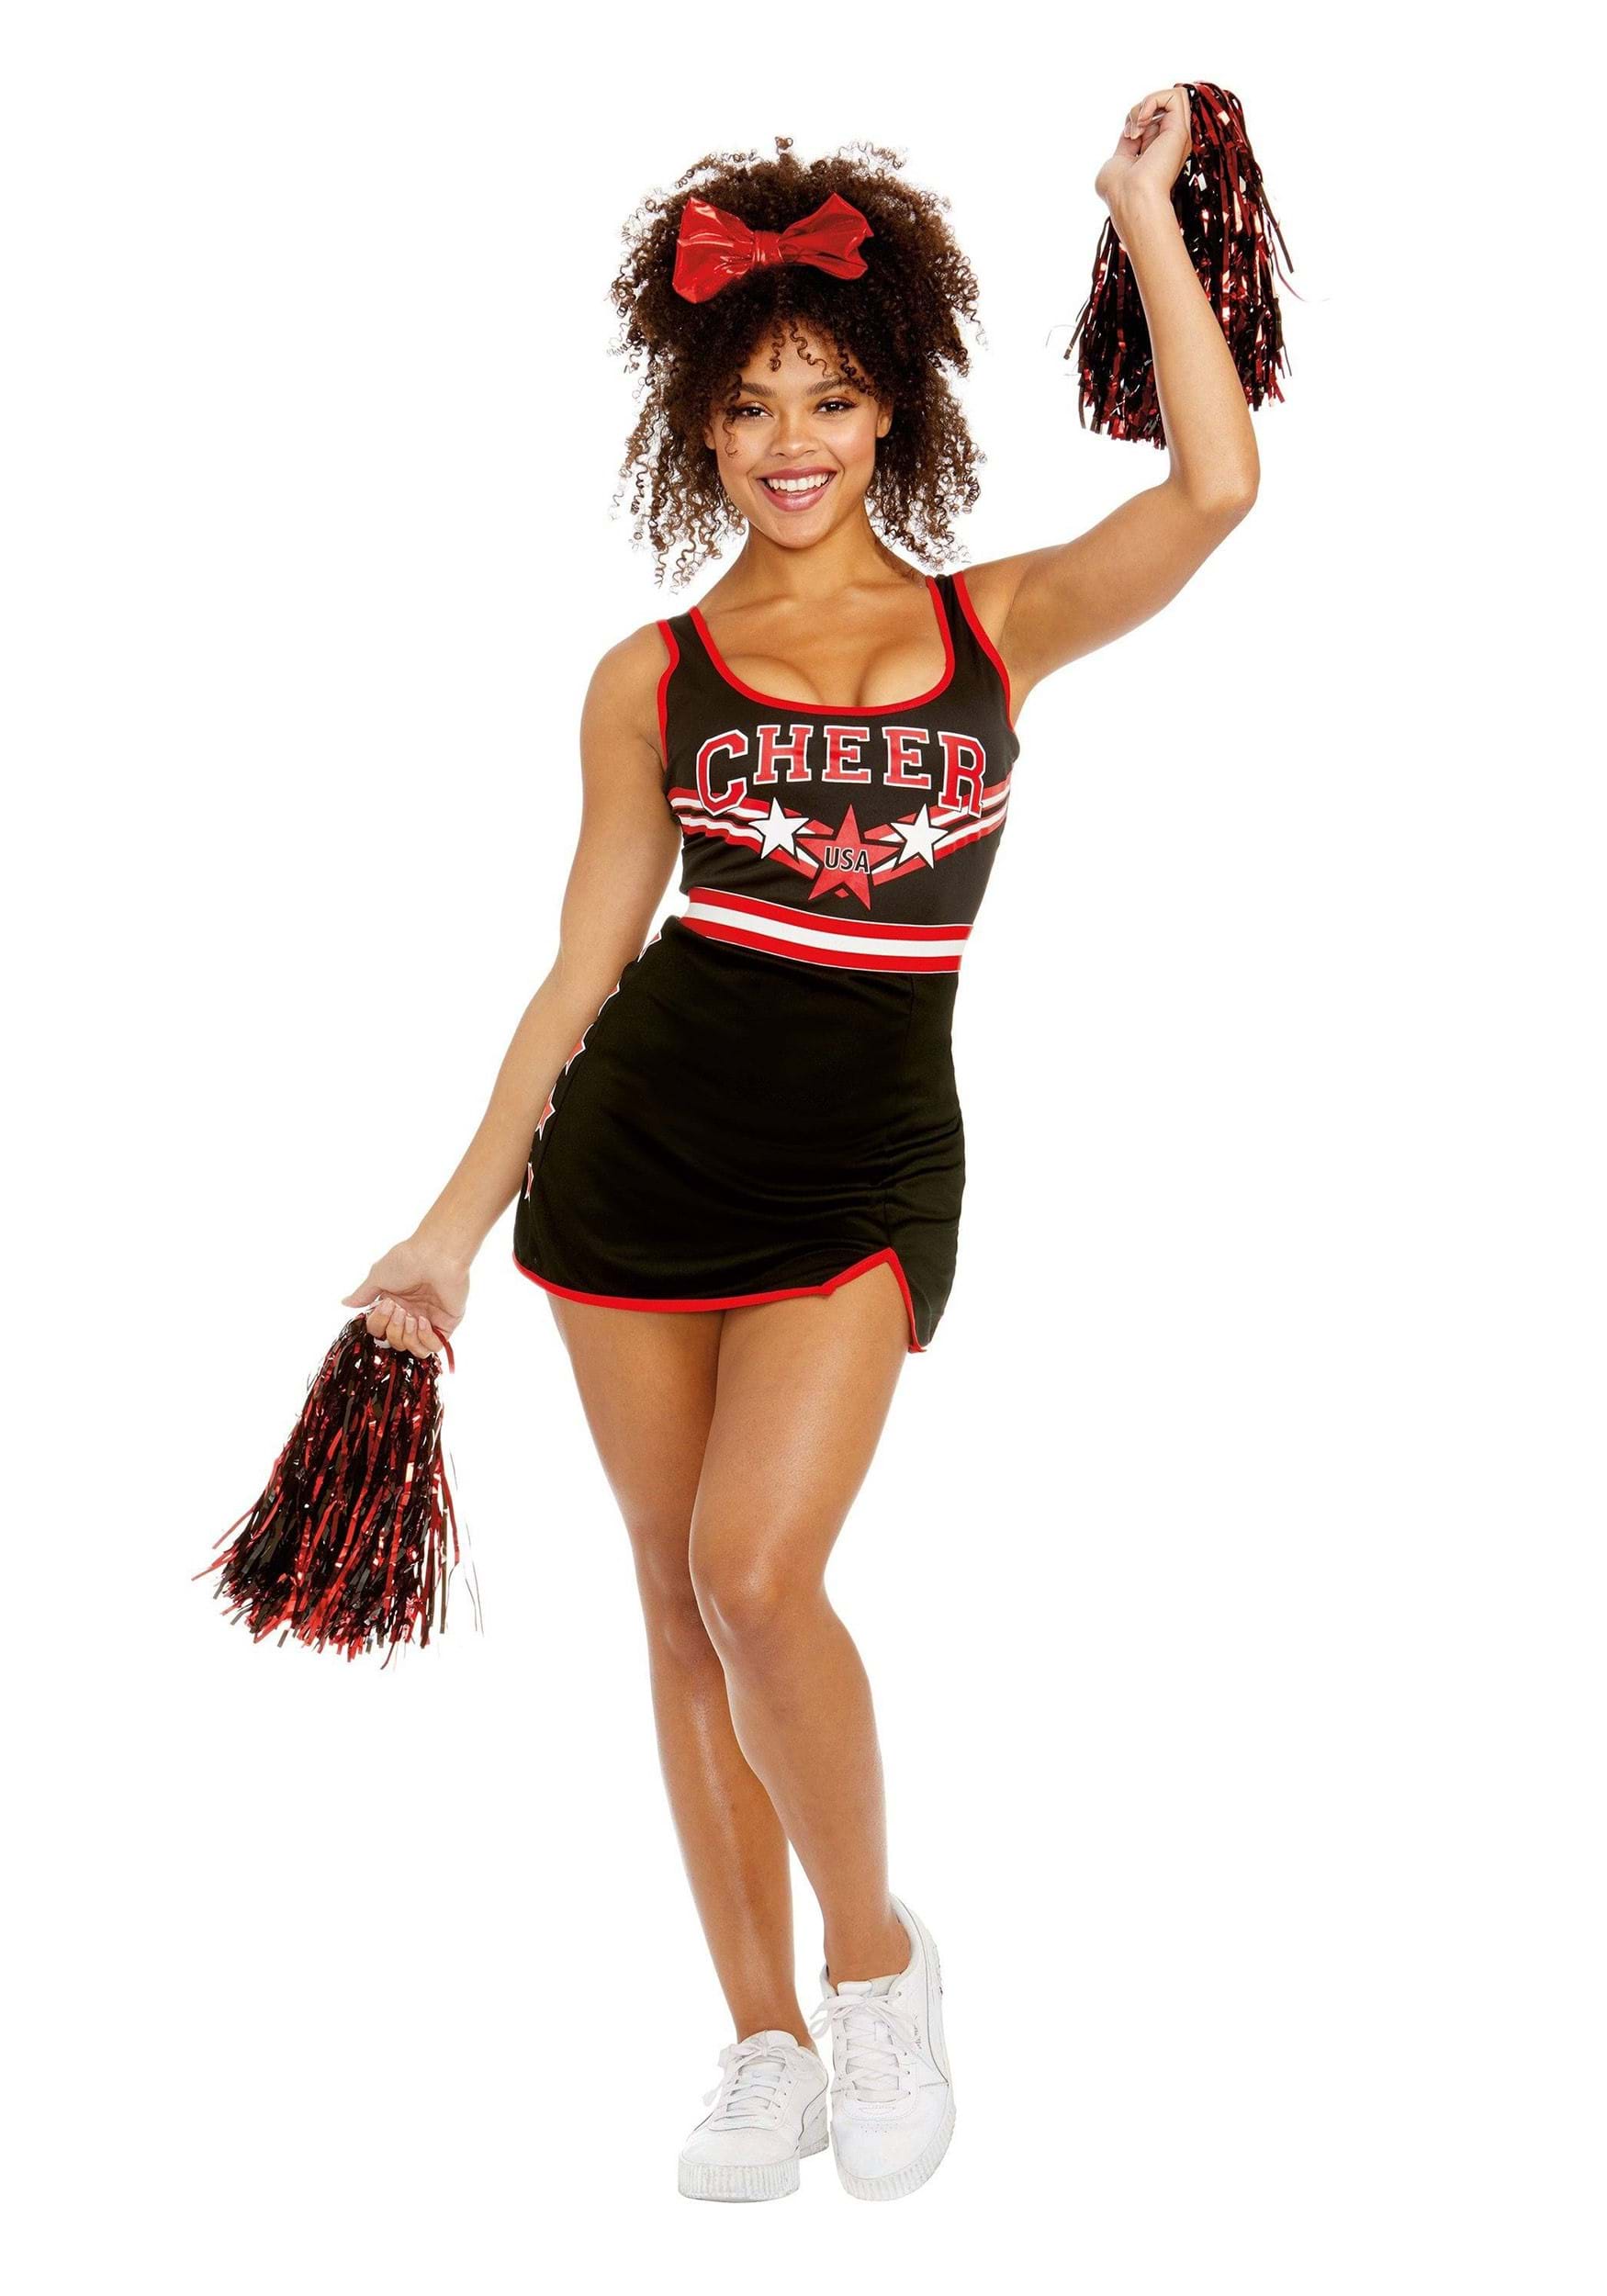 Cheer Team USA Adult Costume for Women